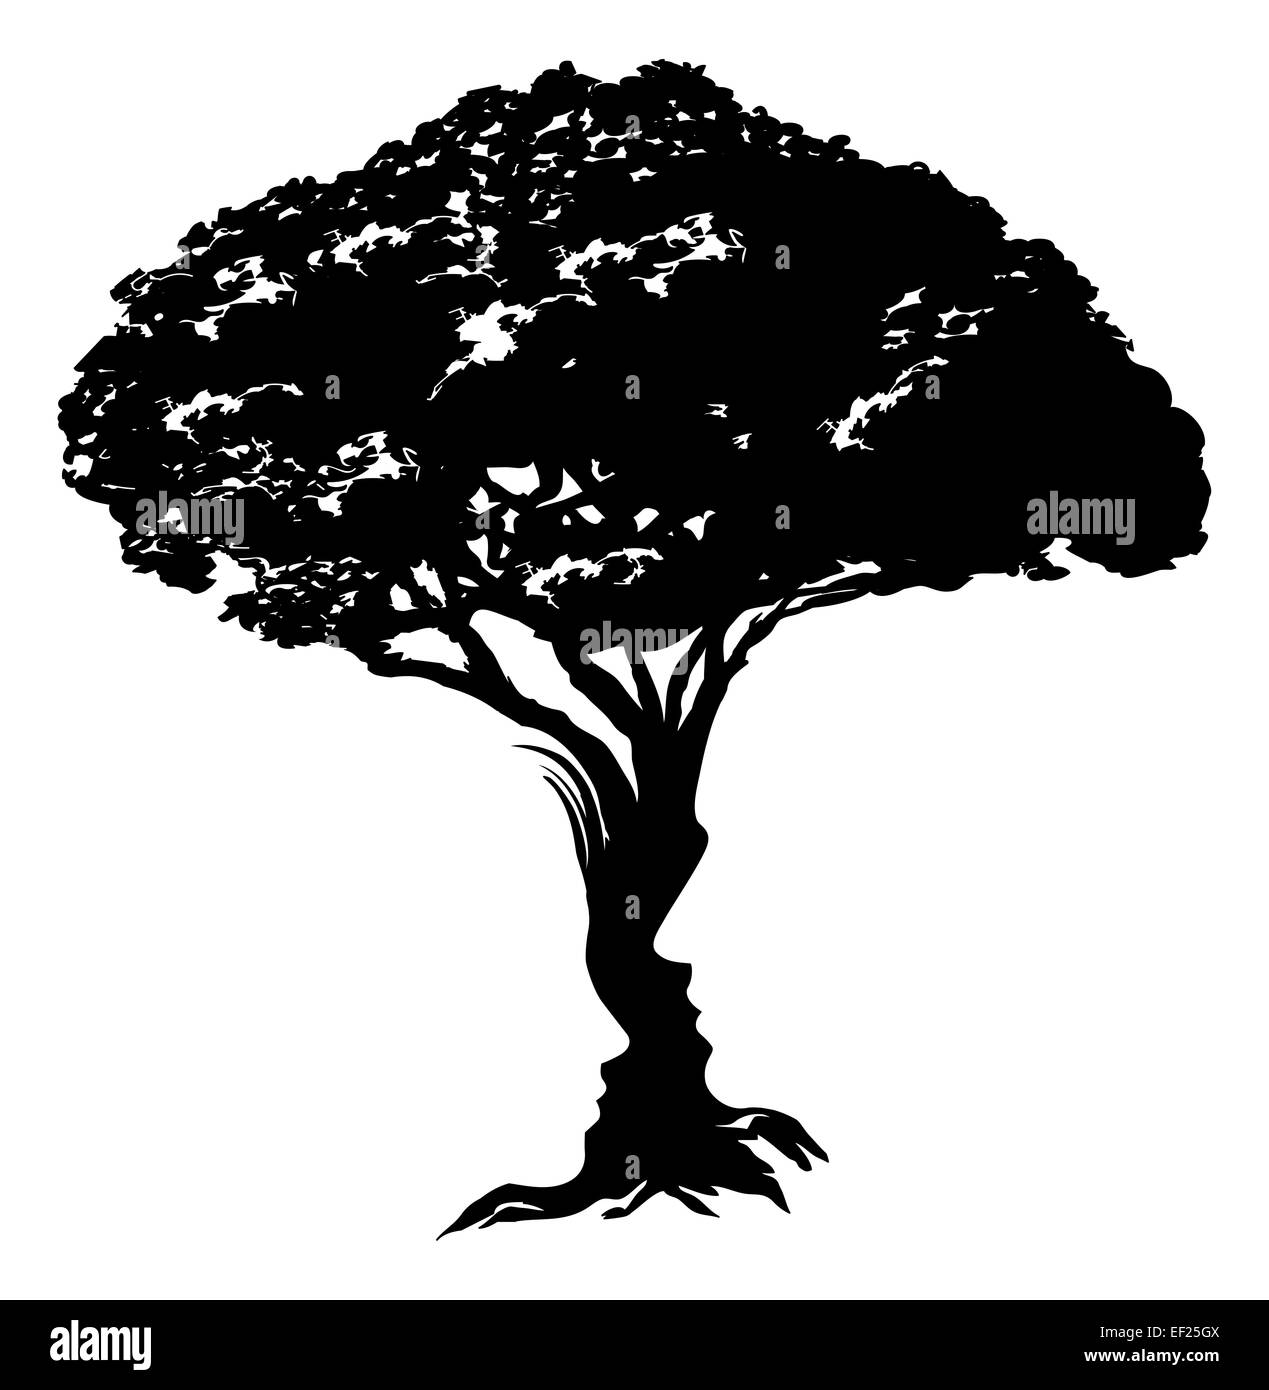 An illustration of an abstract tree optical illusion formed from a man and womans face concept design Stock Photo